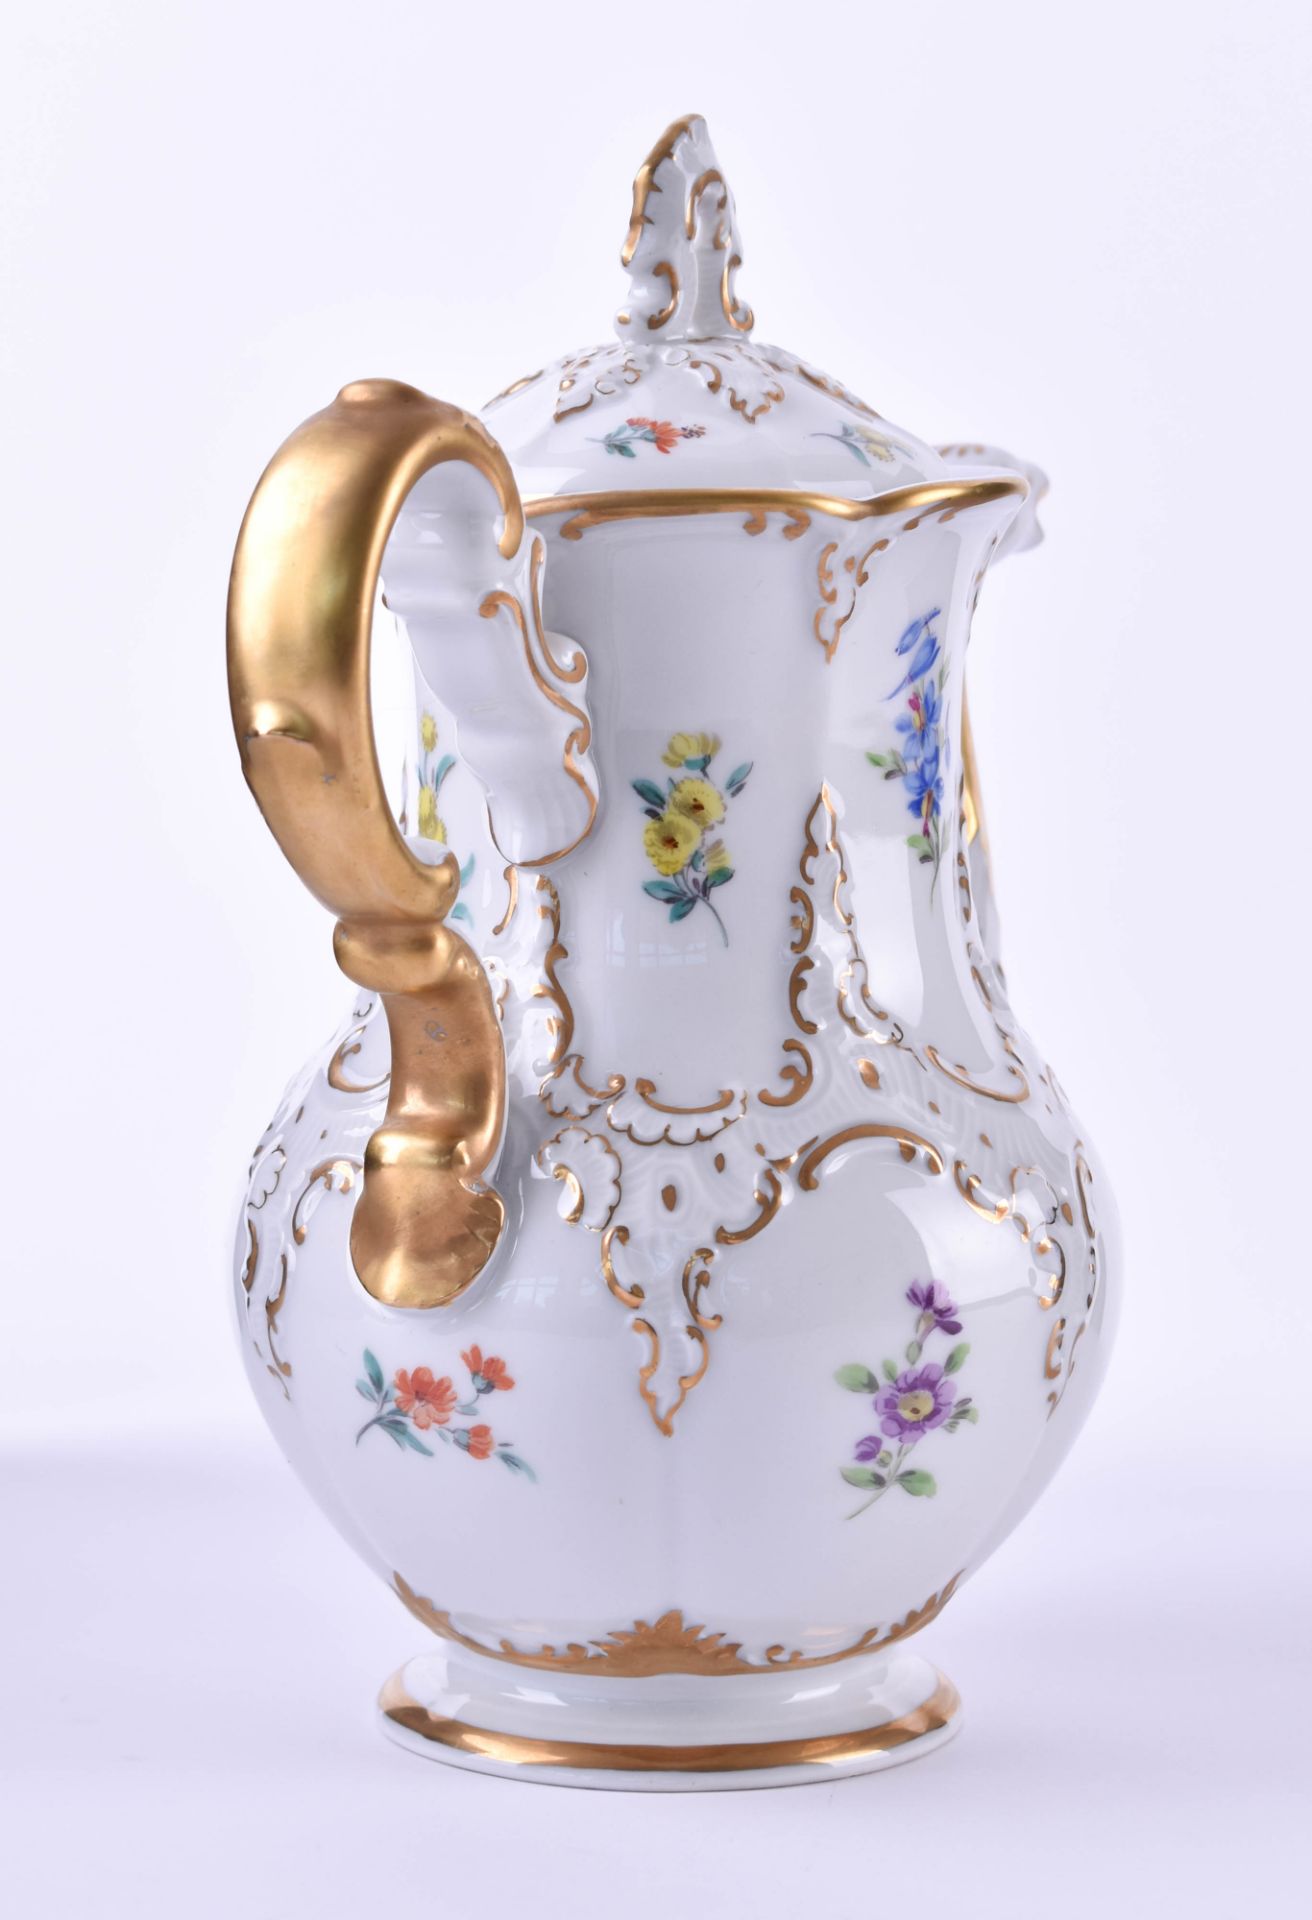 Mocha pot Meissen 20th centuryBaroque decor with scattered flowers, polychrome painted with gold - Bild 3 aus 5